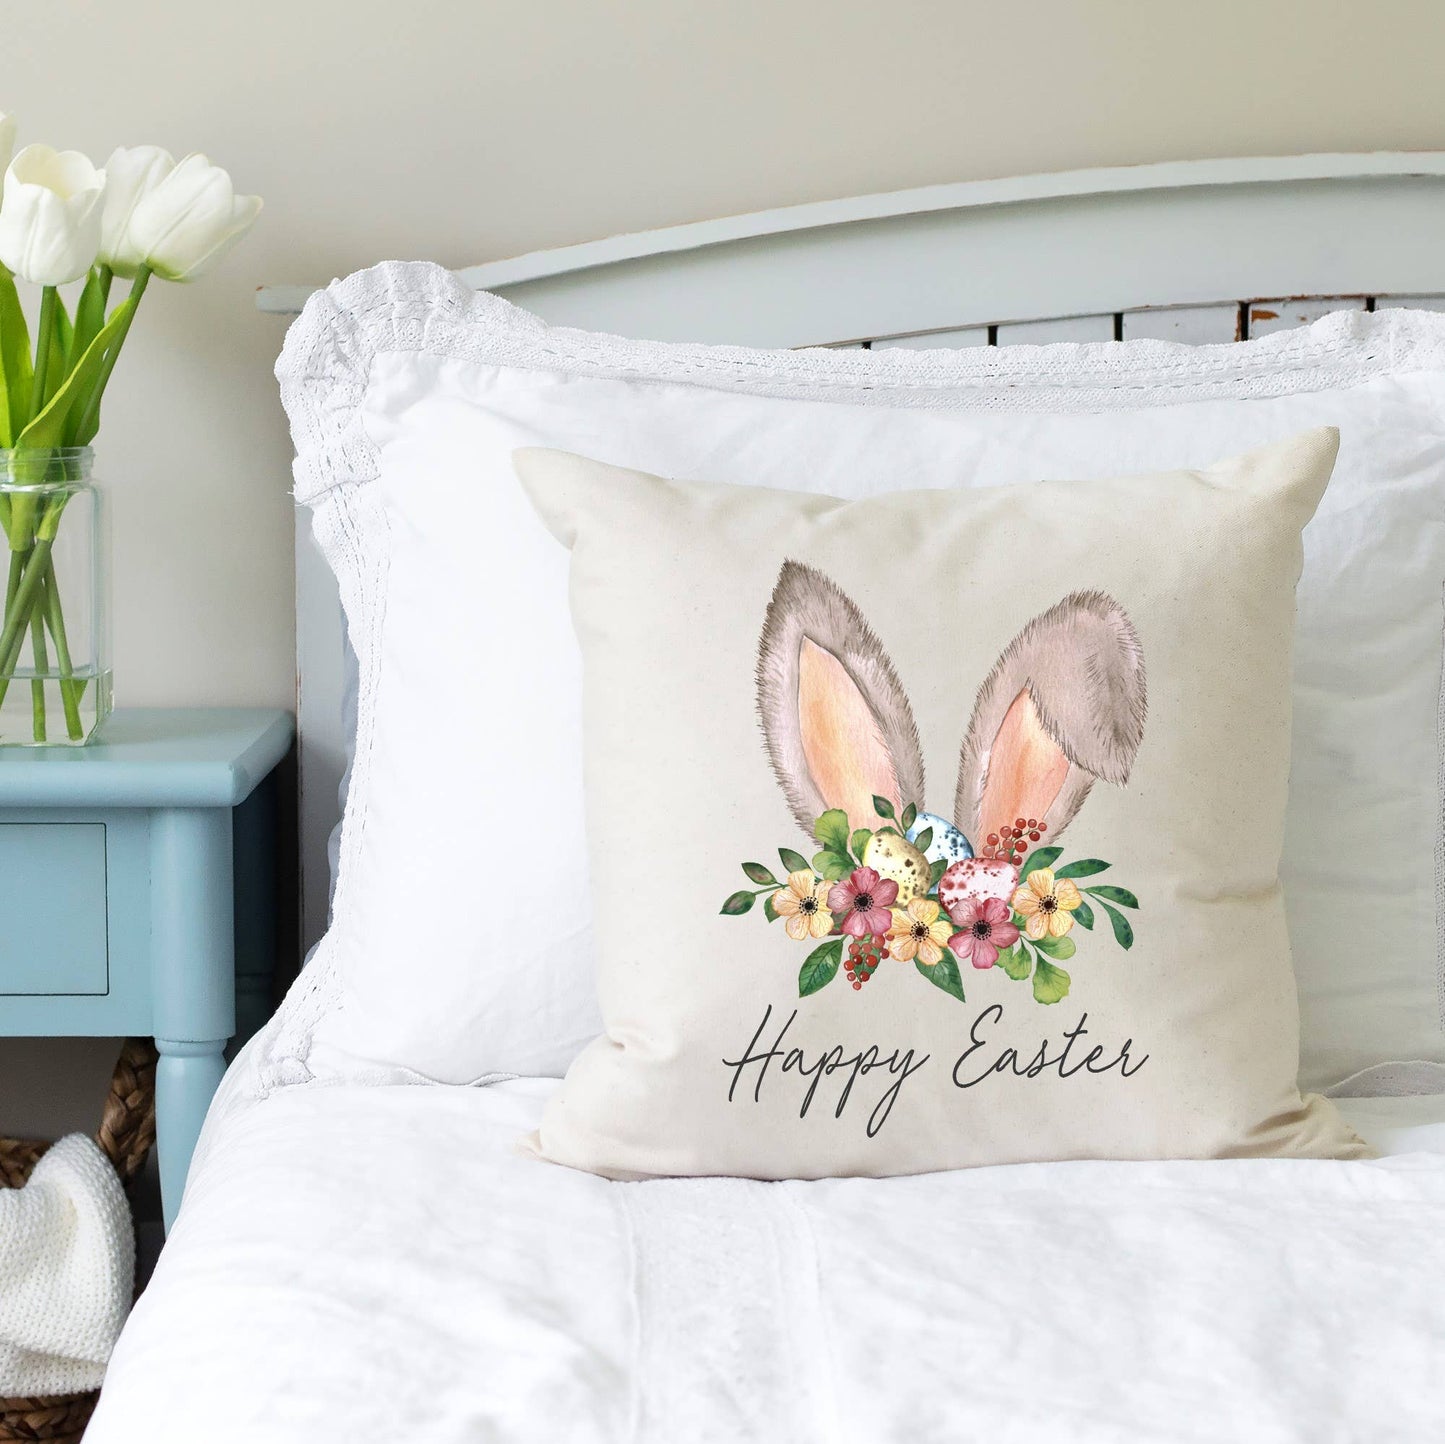 Happy Easter Bunny Ears Pillow